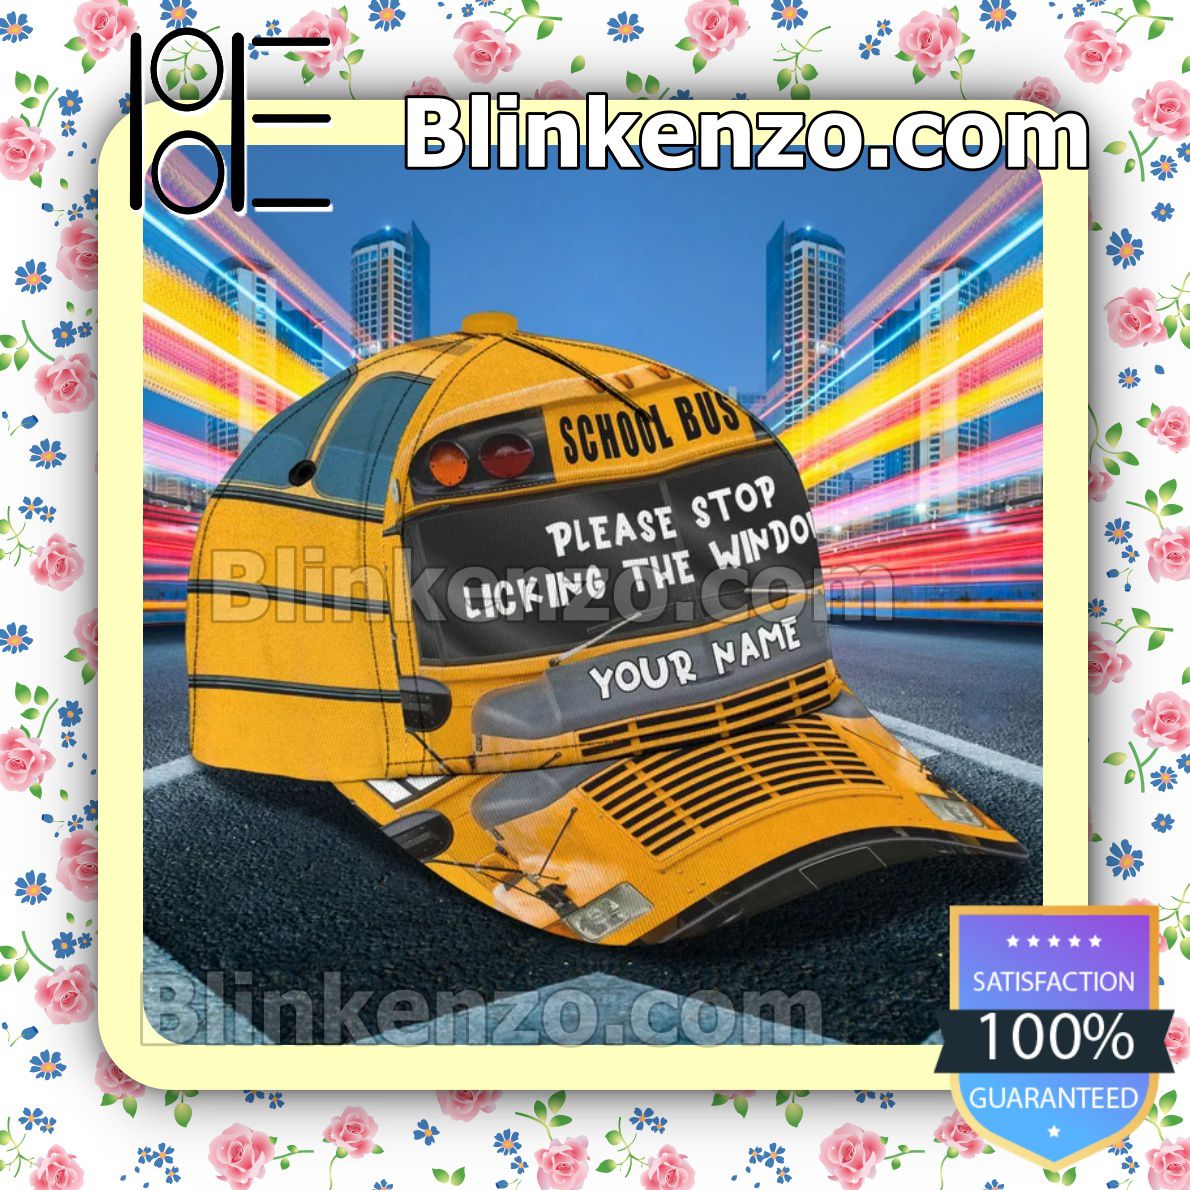 All Over Print Personalized School Bus Please Stop Licking The Windows Baseball Caps Gift For Boyfriend